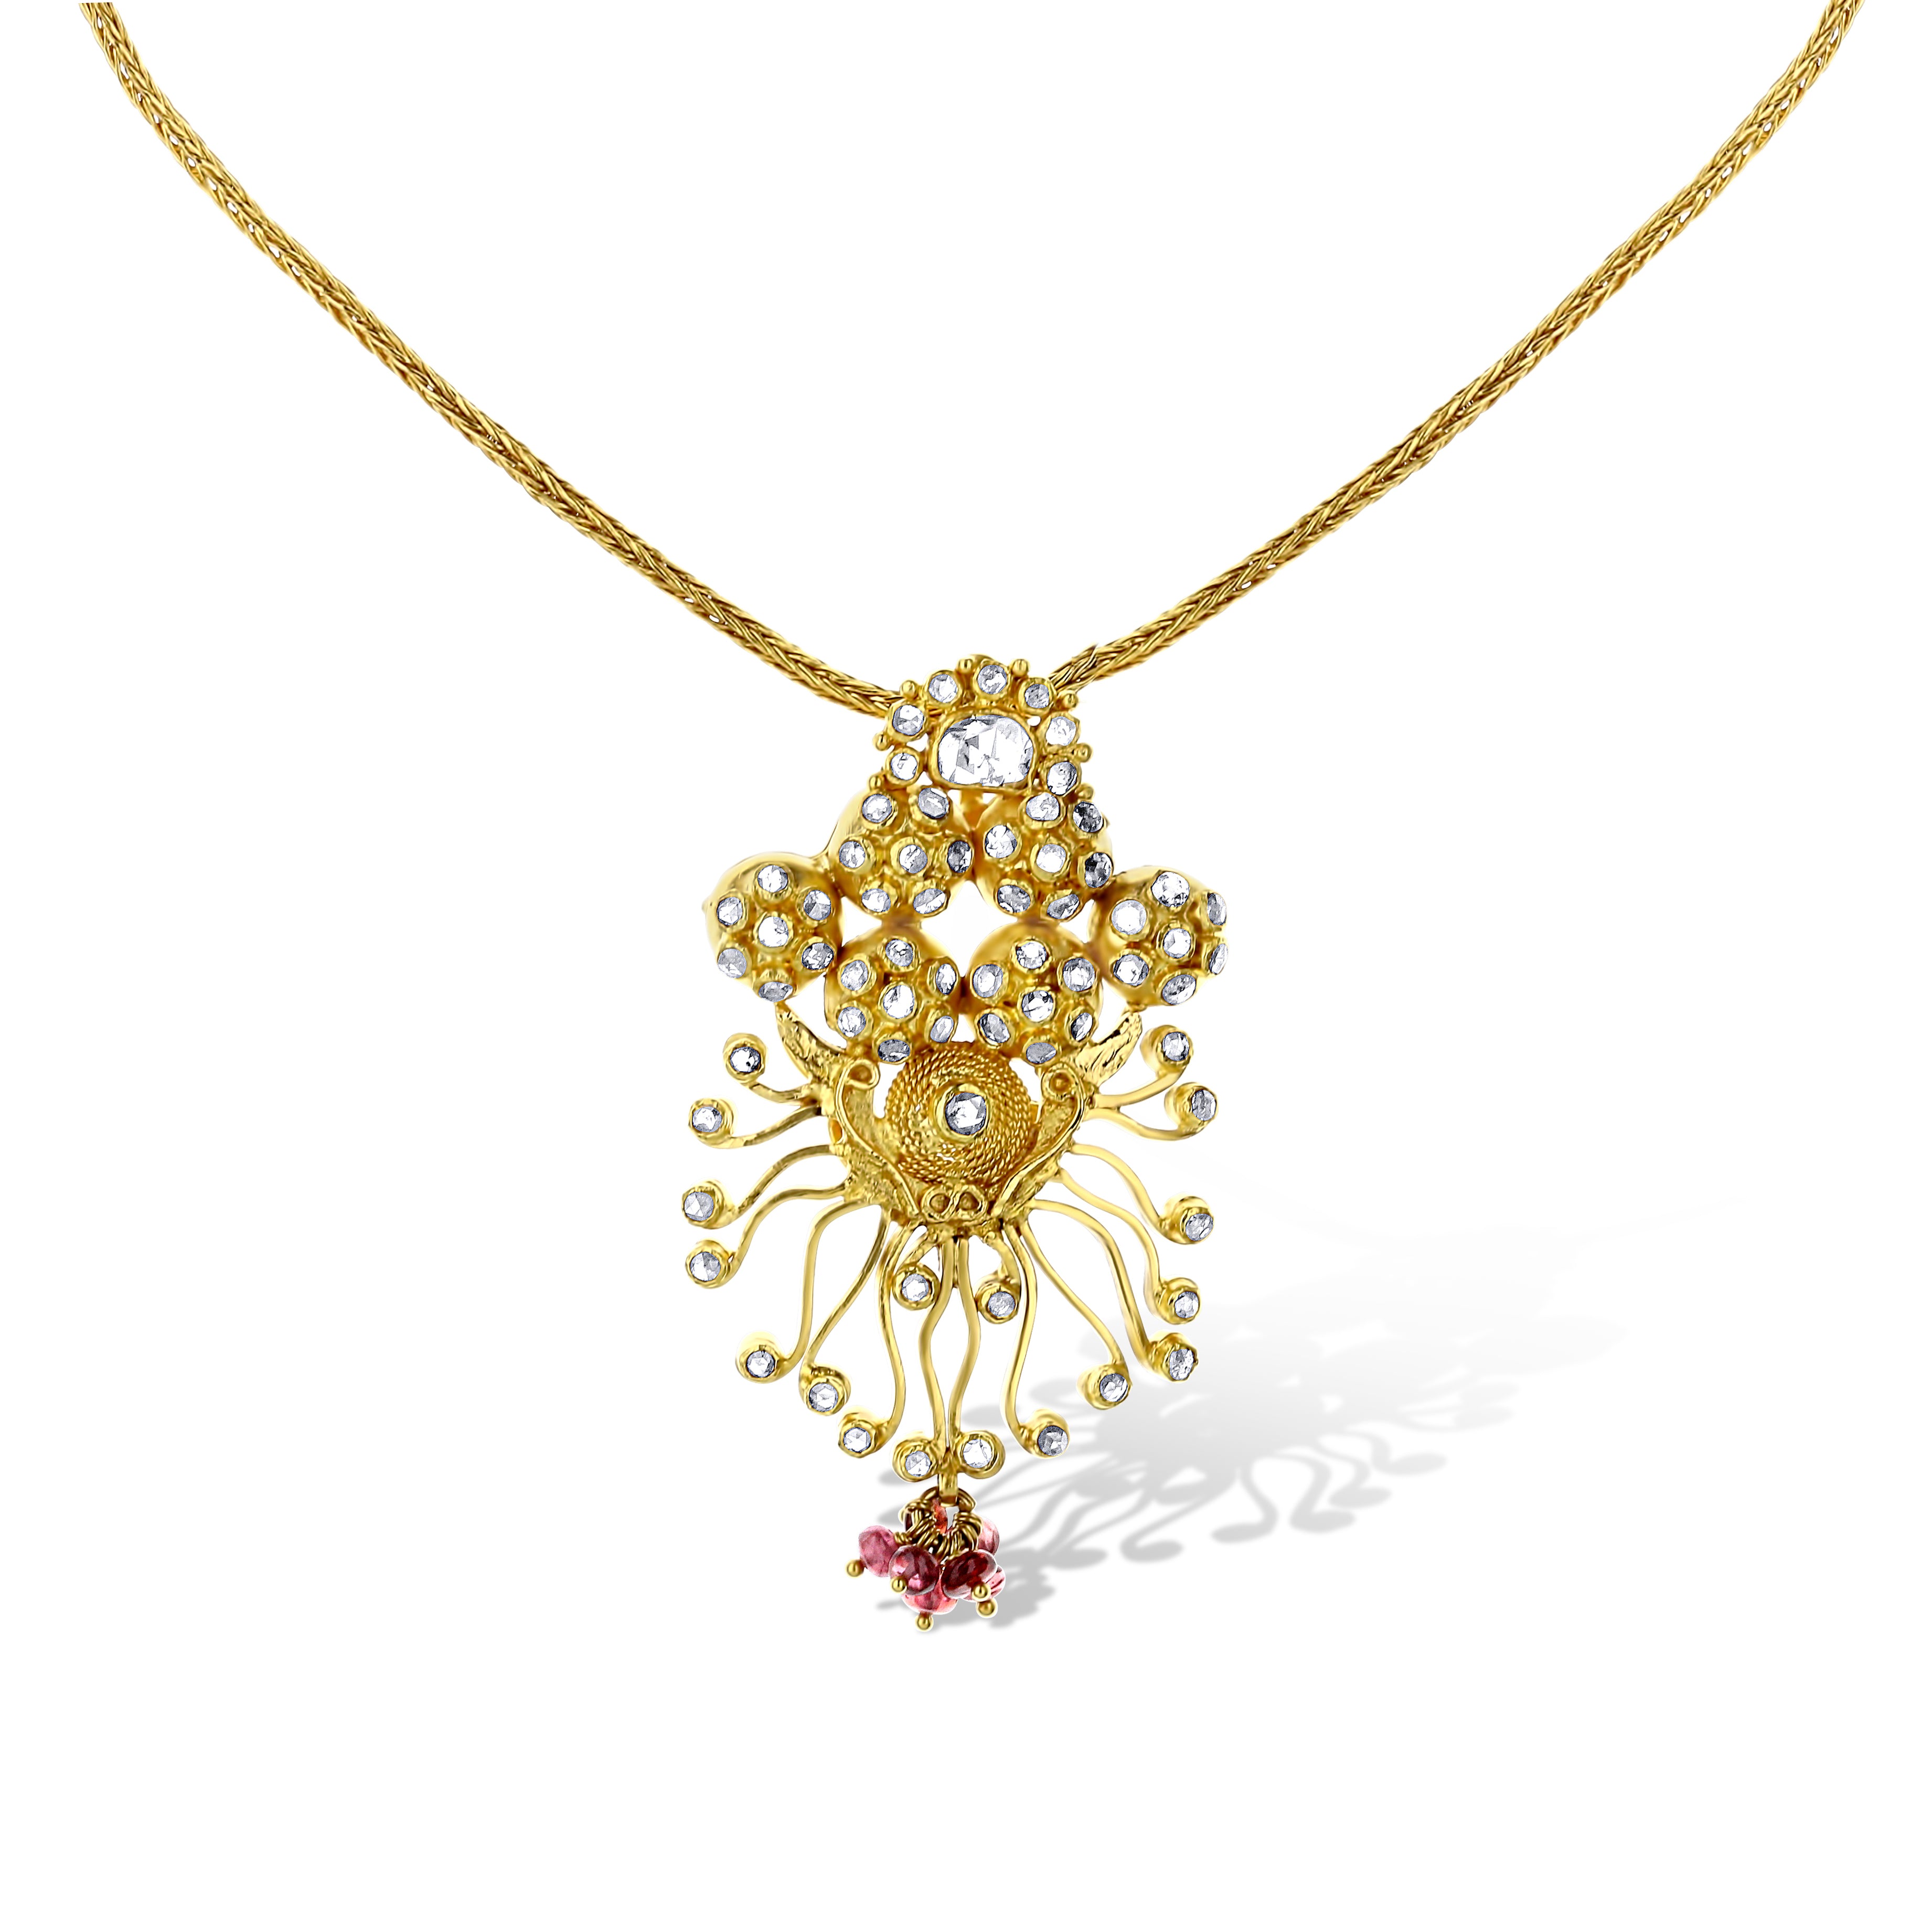 Latest Model 22K Gold Short Necklace - South India Jewels